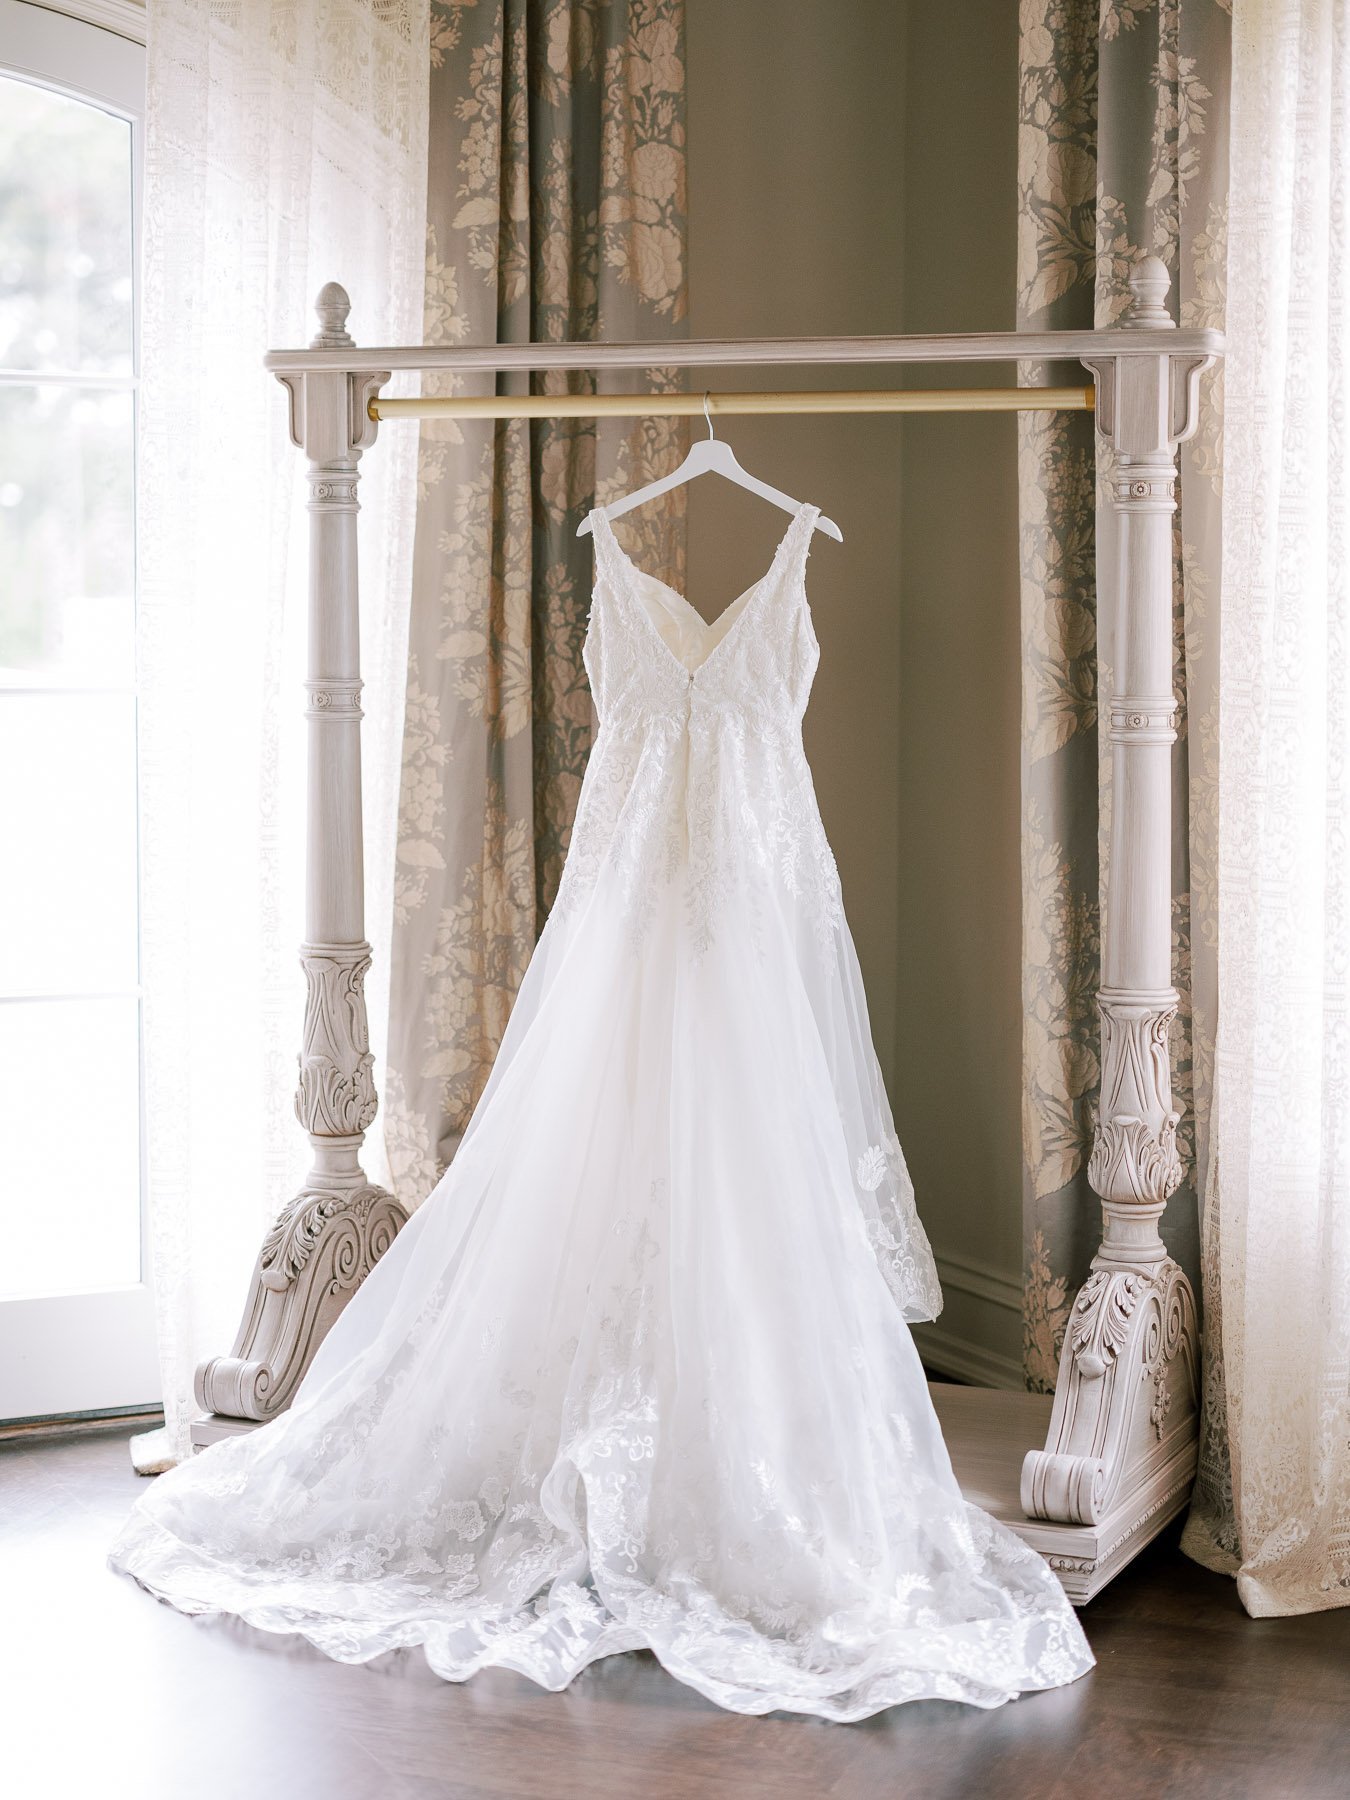 Park Chateau Wedding by Michelle Lange Photography-14.jpg